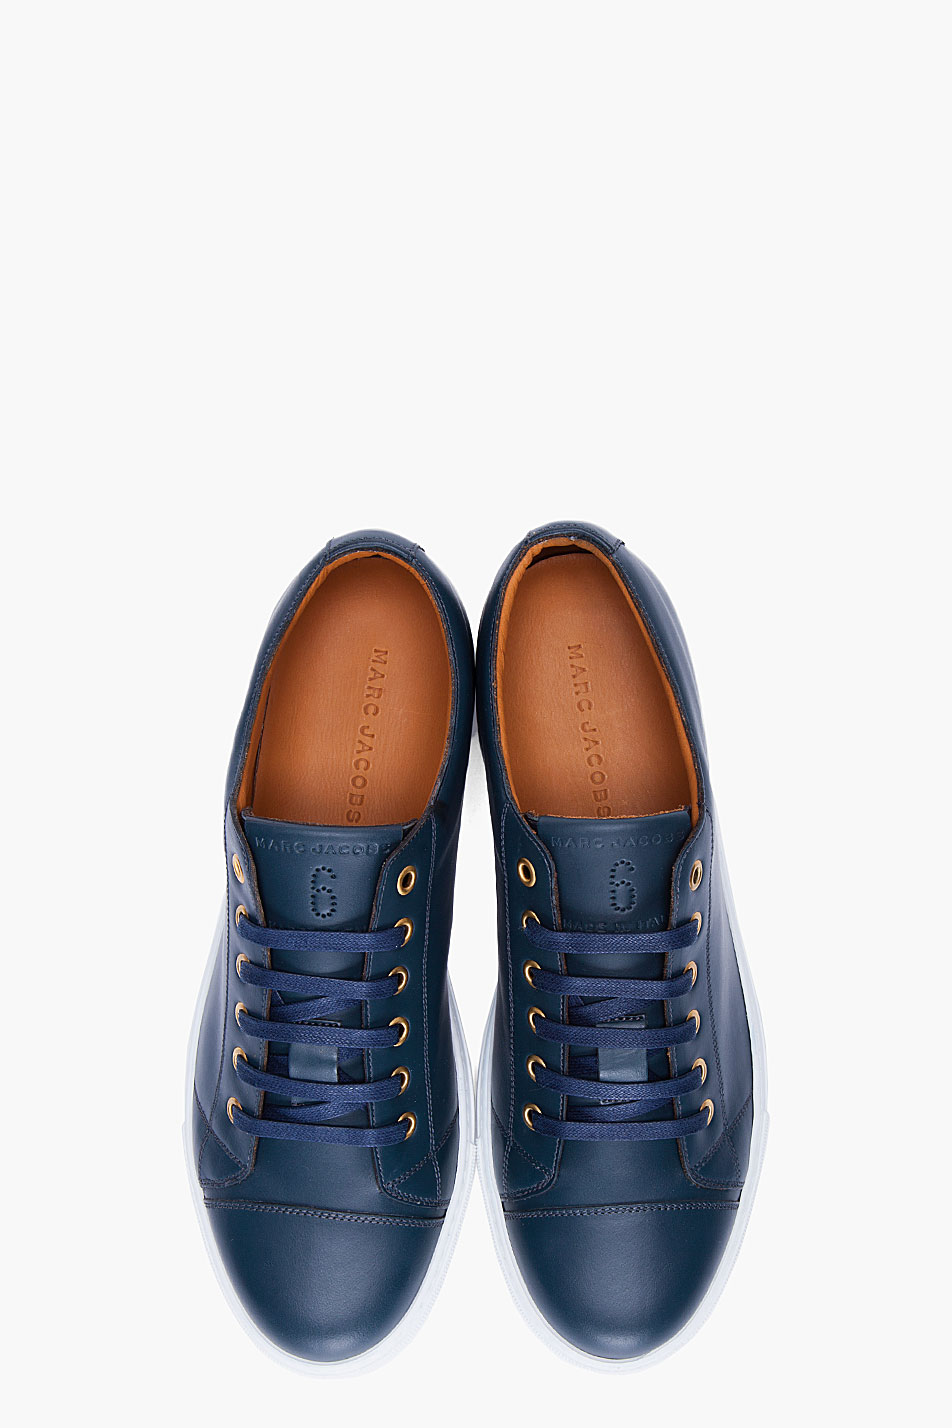 Lyst - Marc Jacobs Navy Leather Sneakers in Blue for Men